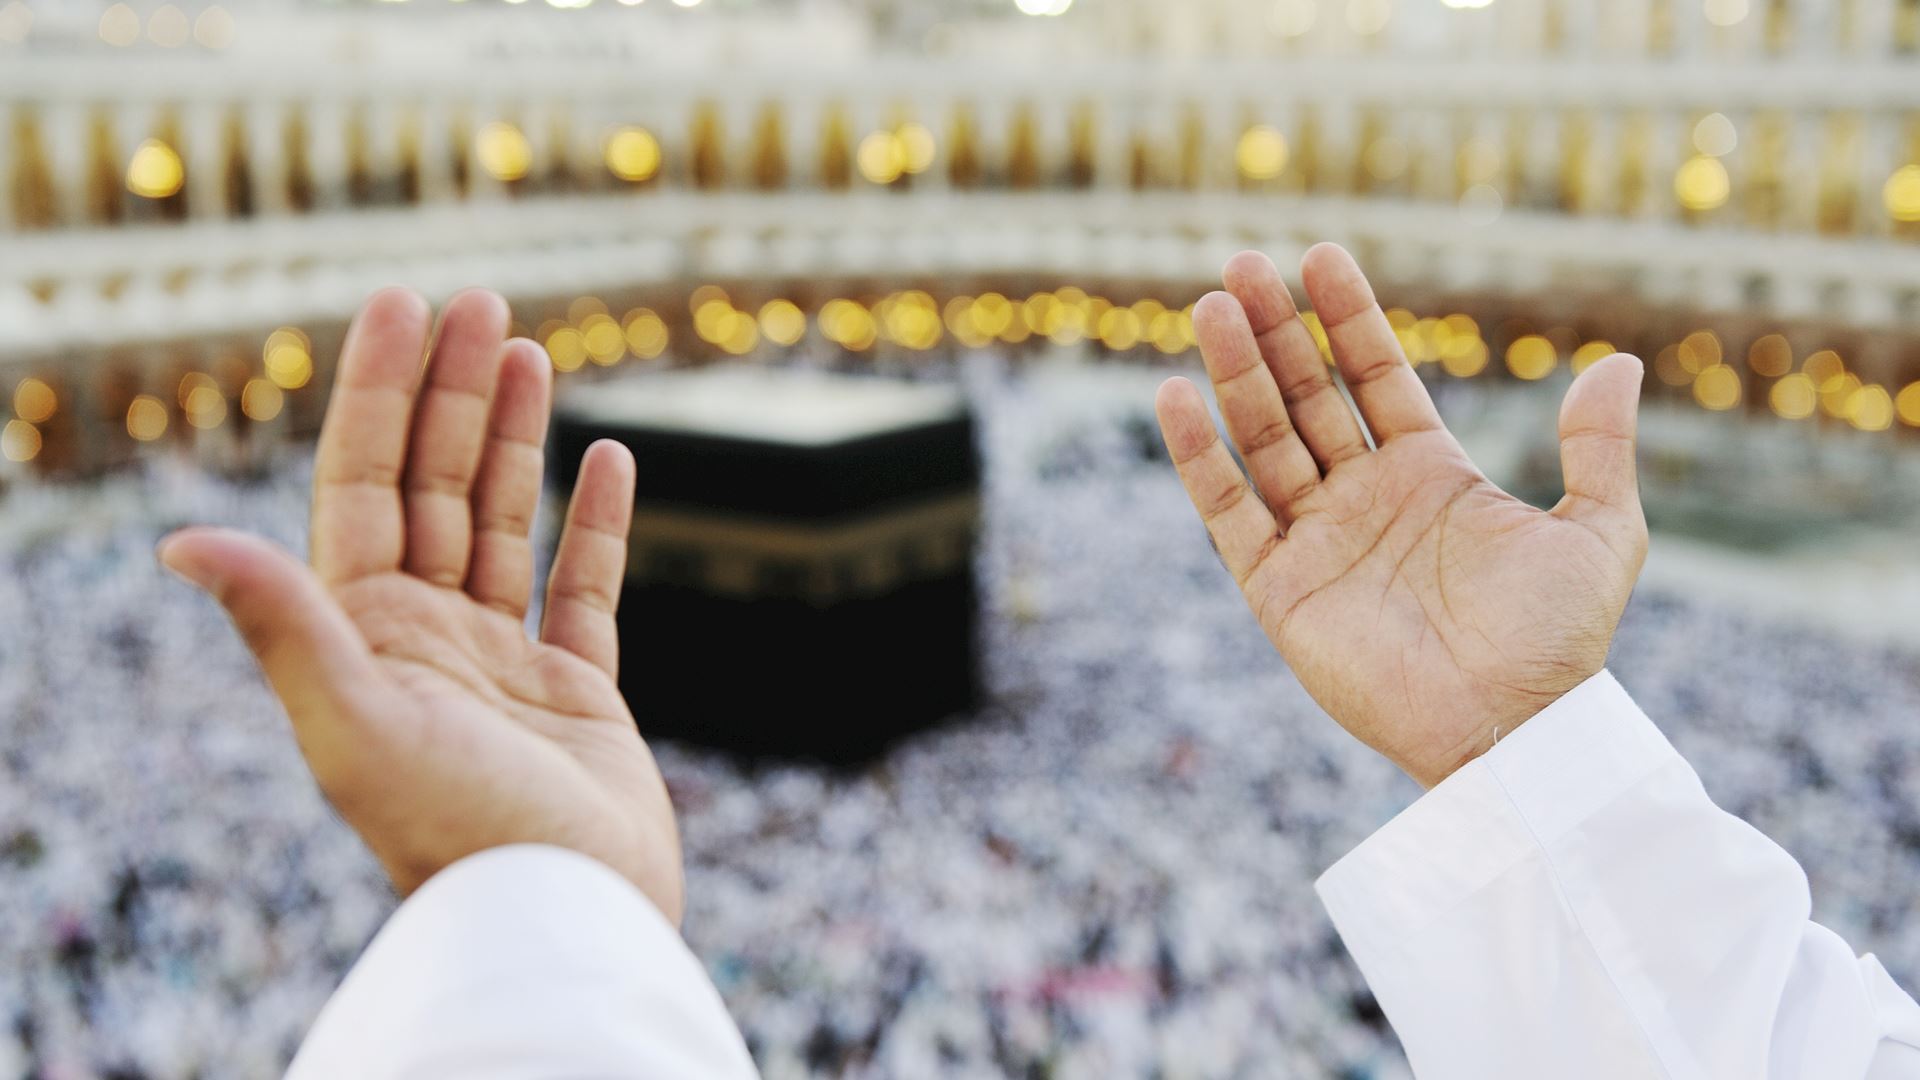 Umrah Packages | Get the Best Deal For Your Spiritual Journey